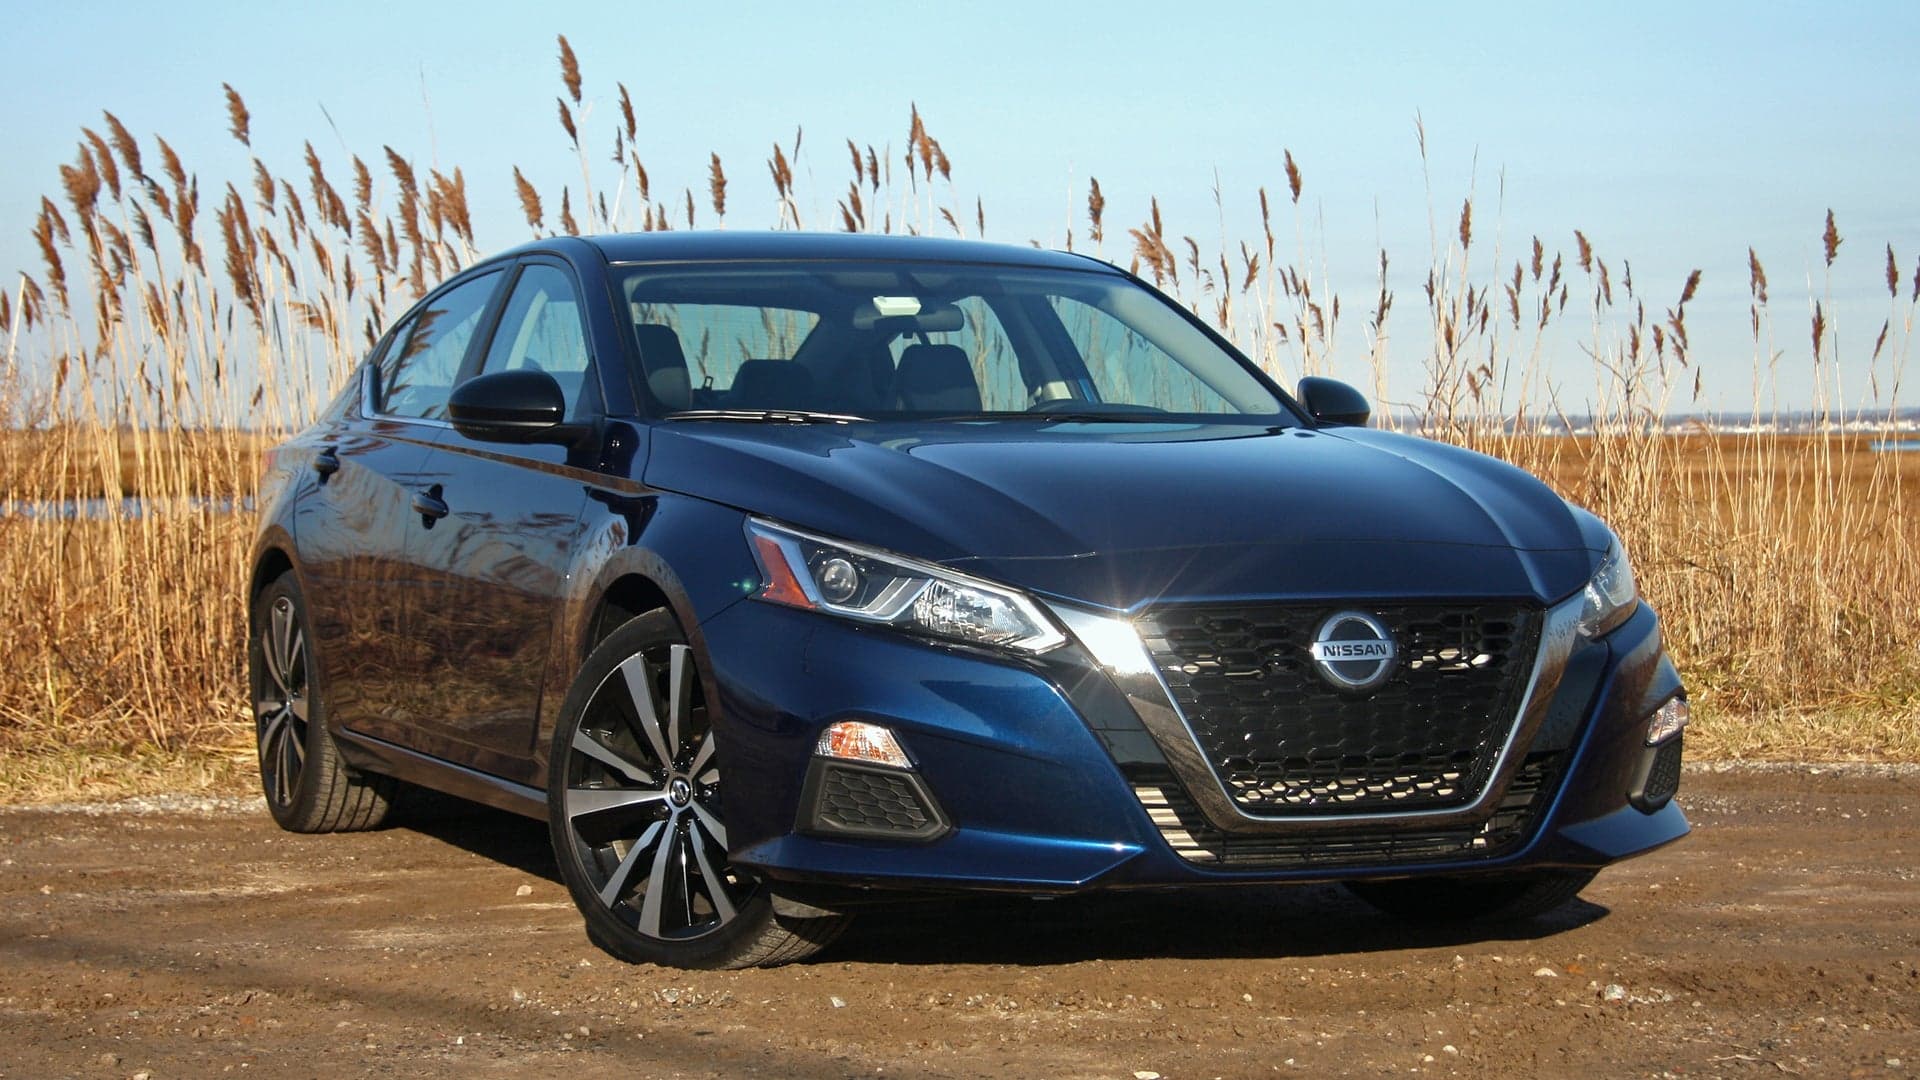 2019 Nissan Altima New Dad Review: Turbo Pace and Plenty of Space Make for a Good Family Car